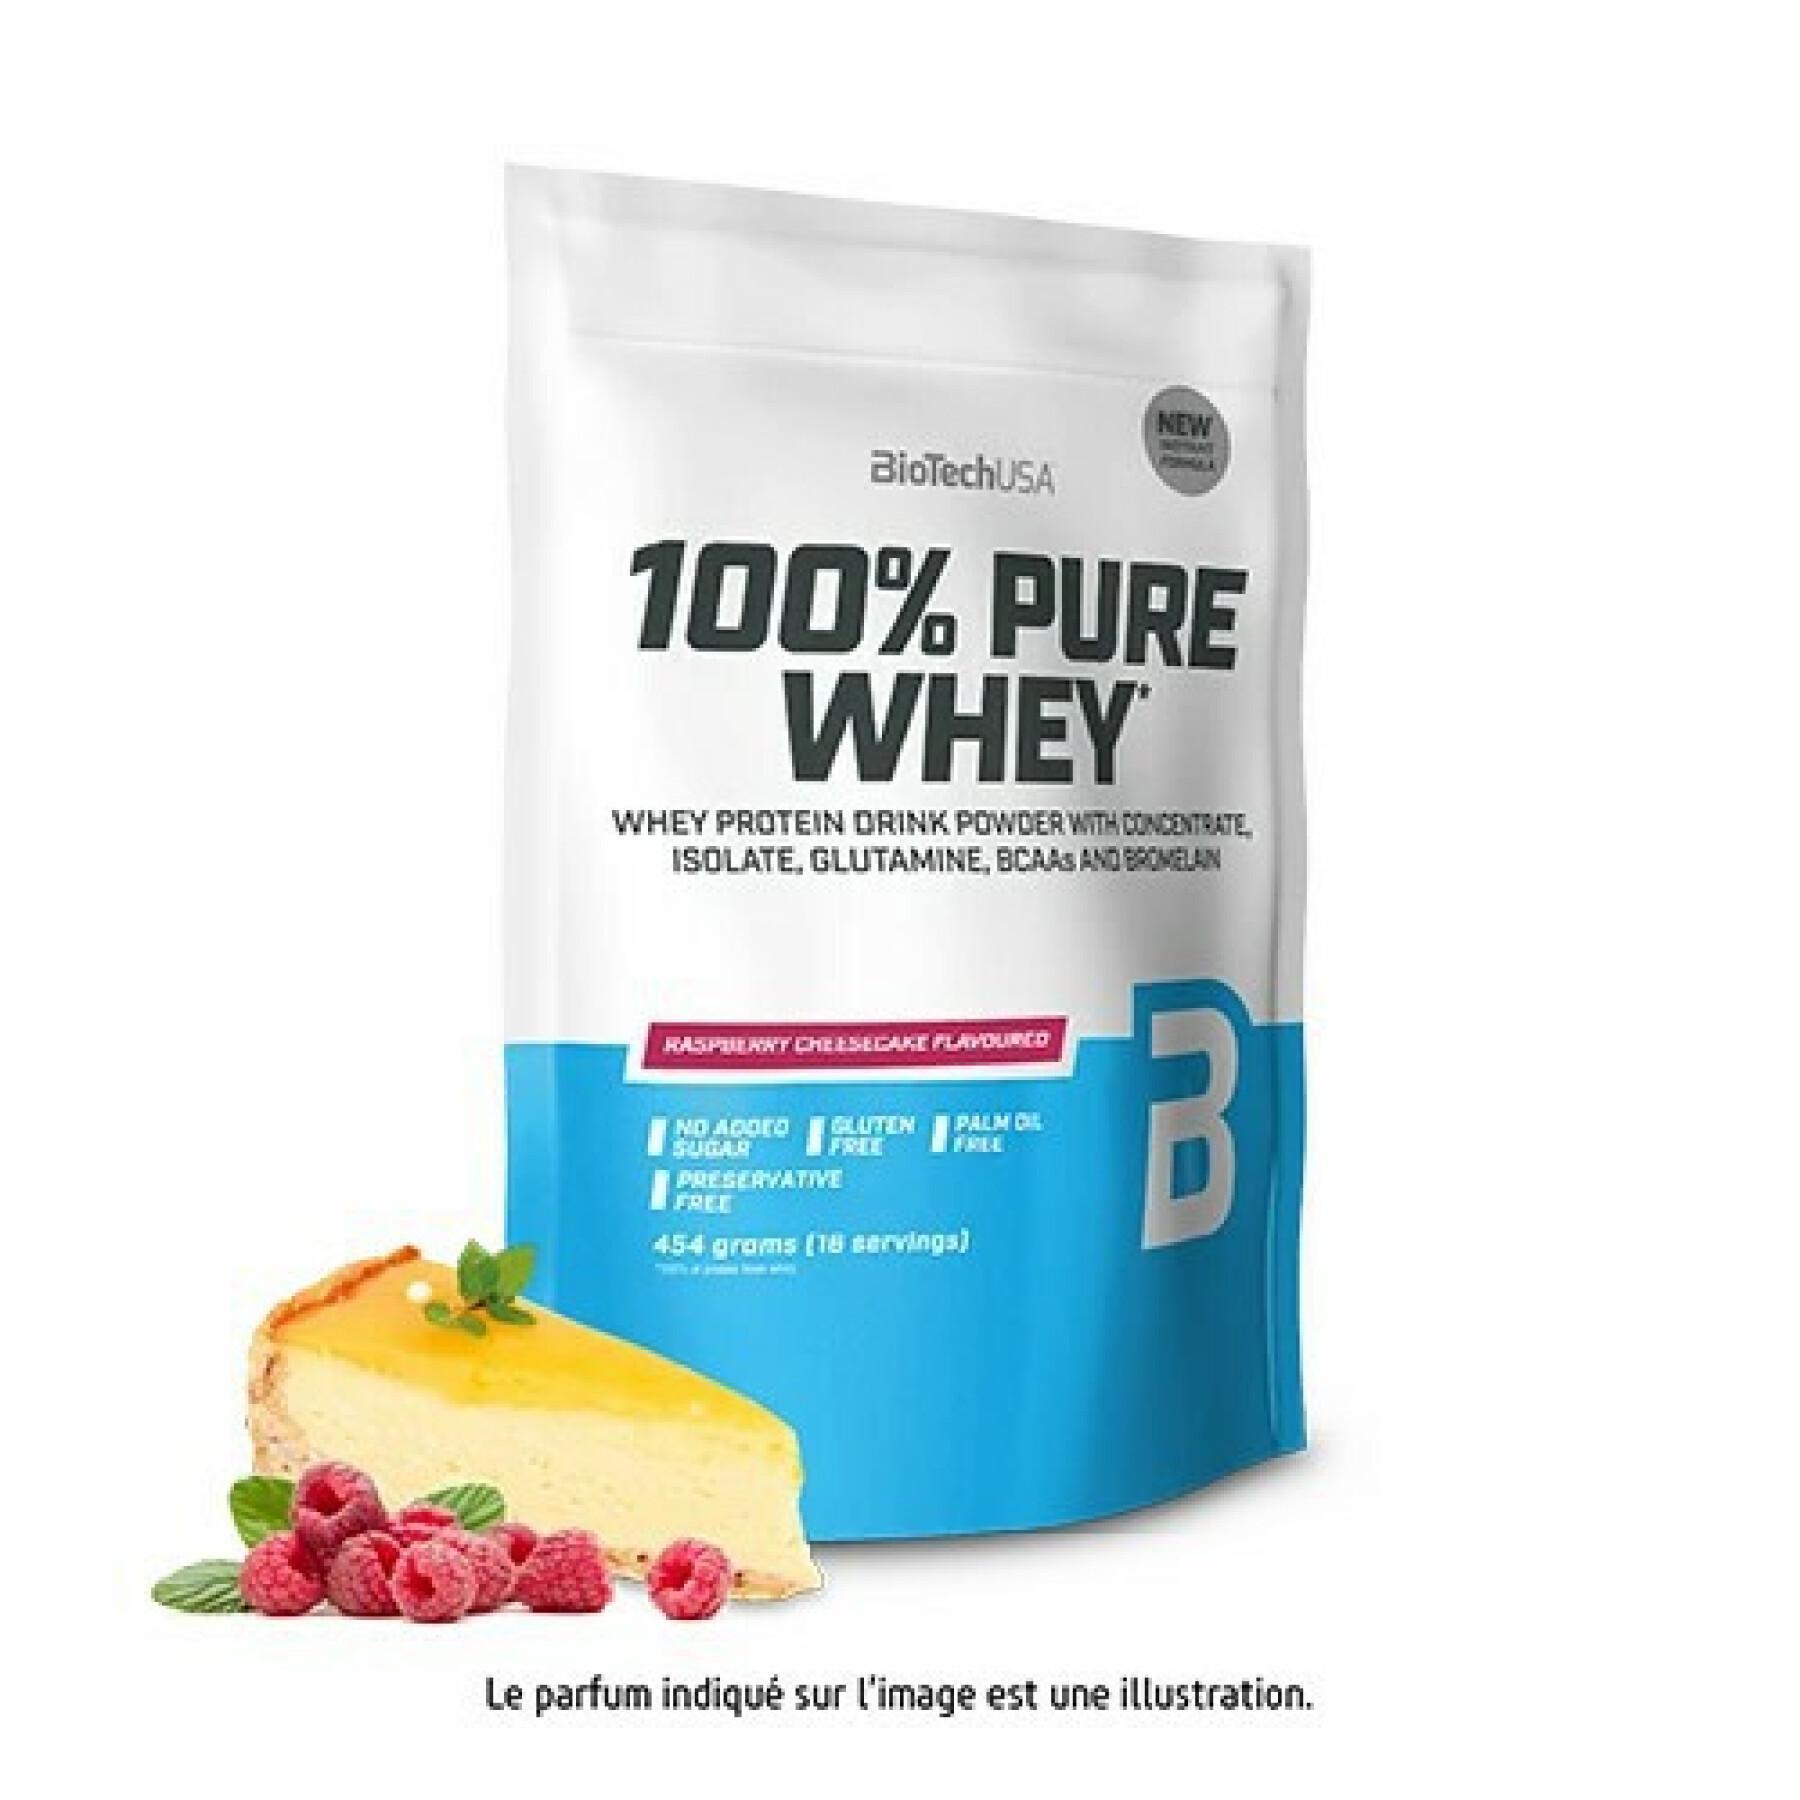 Lot of 10 bags of 100% pure whey protein Biotech USA - Cheesecake aux frambois - 454g